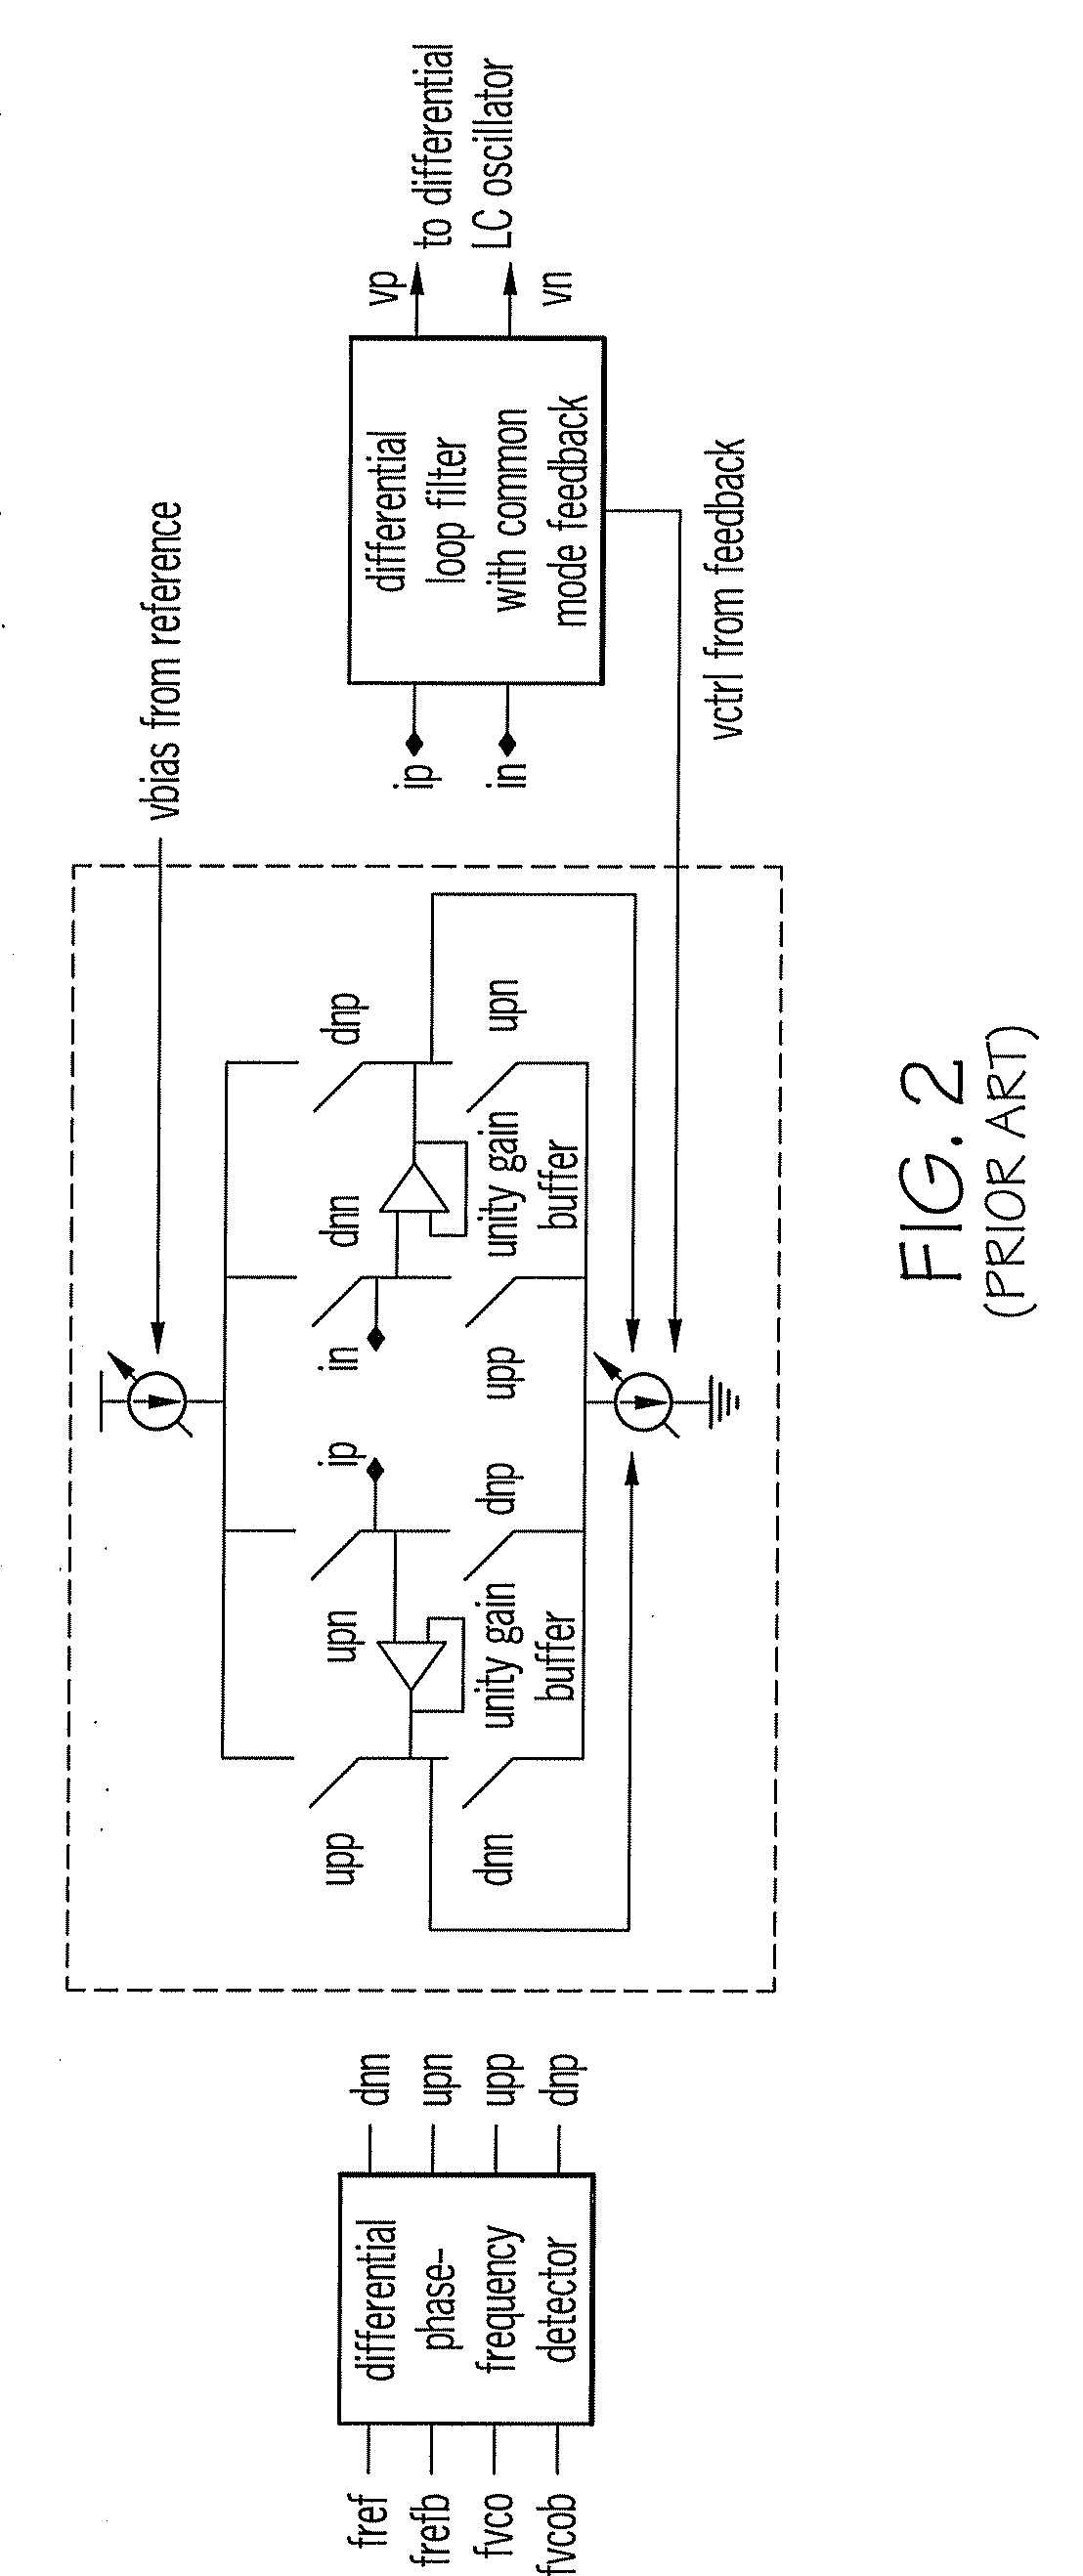 Method to Reduce Static Phase Errors and Reference Spurs in Charge Pumps